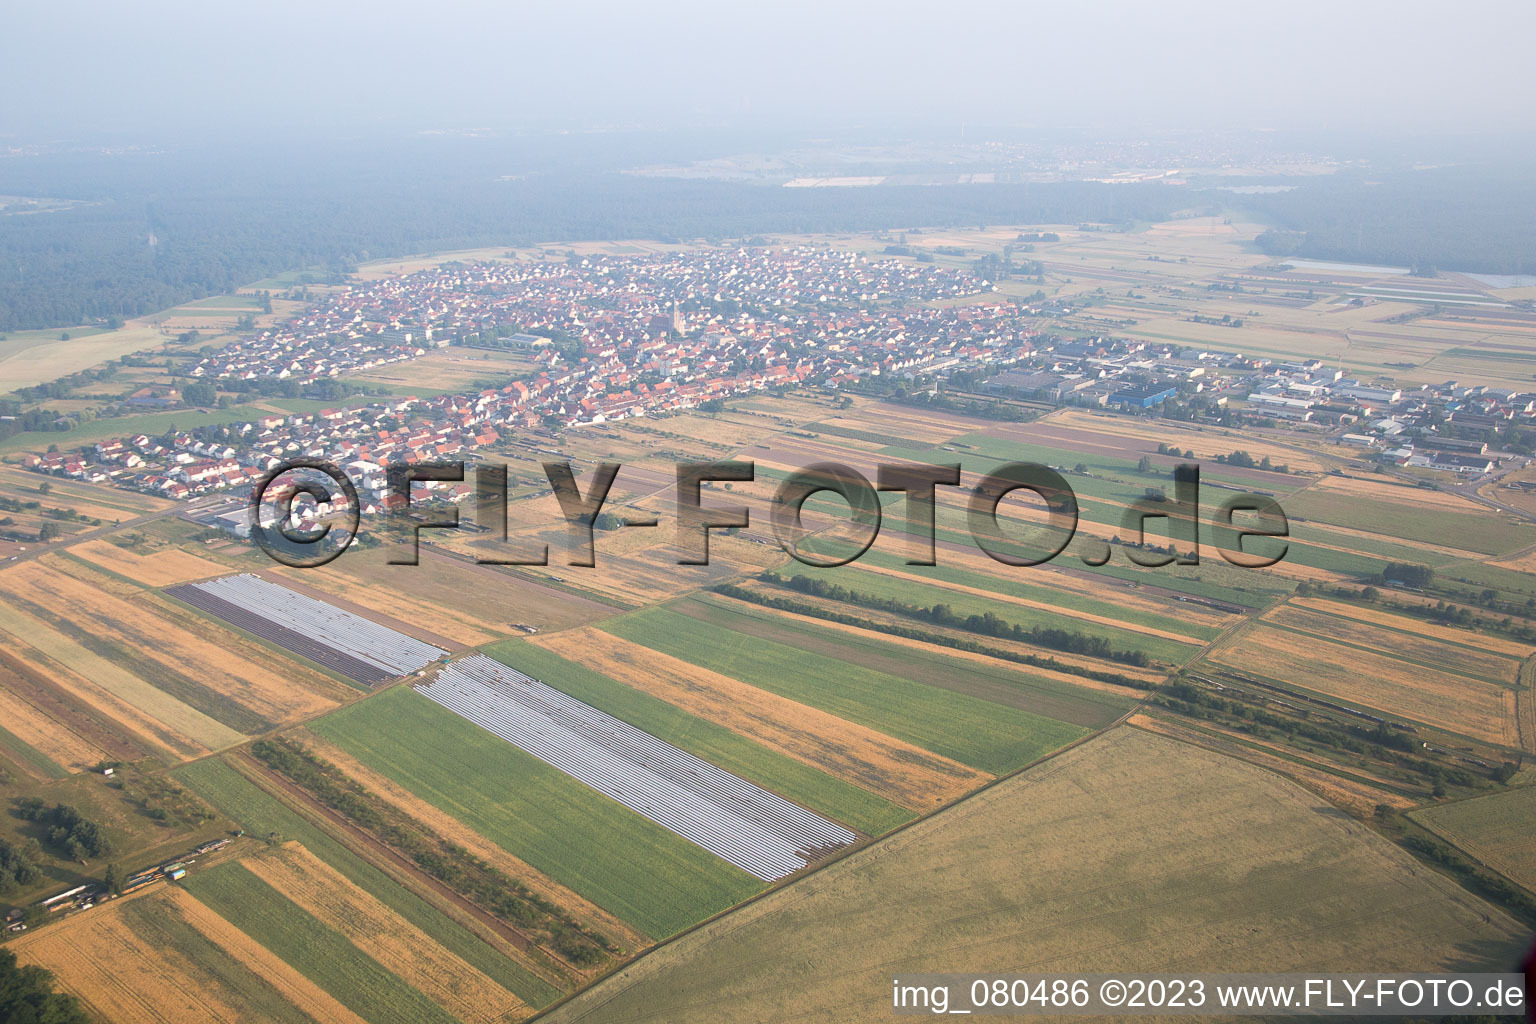 Forst in the state Baden-Wuerttemberg, Germany from the drone perspective